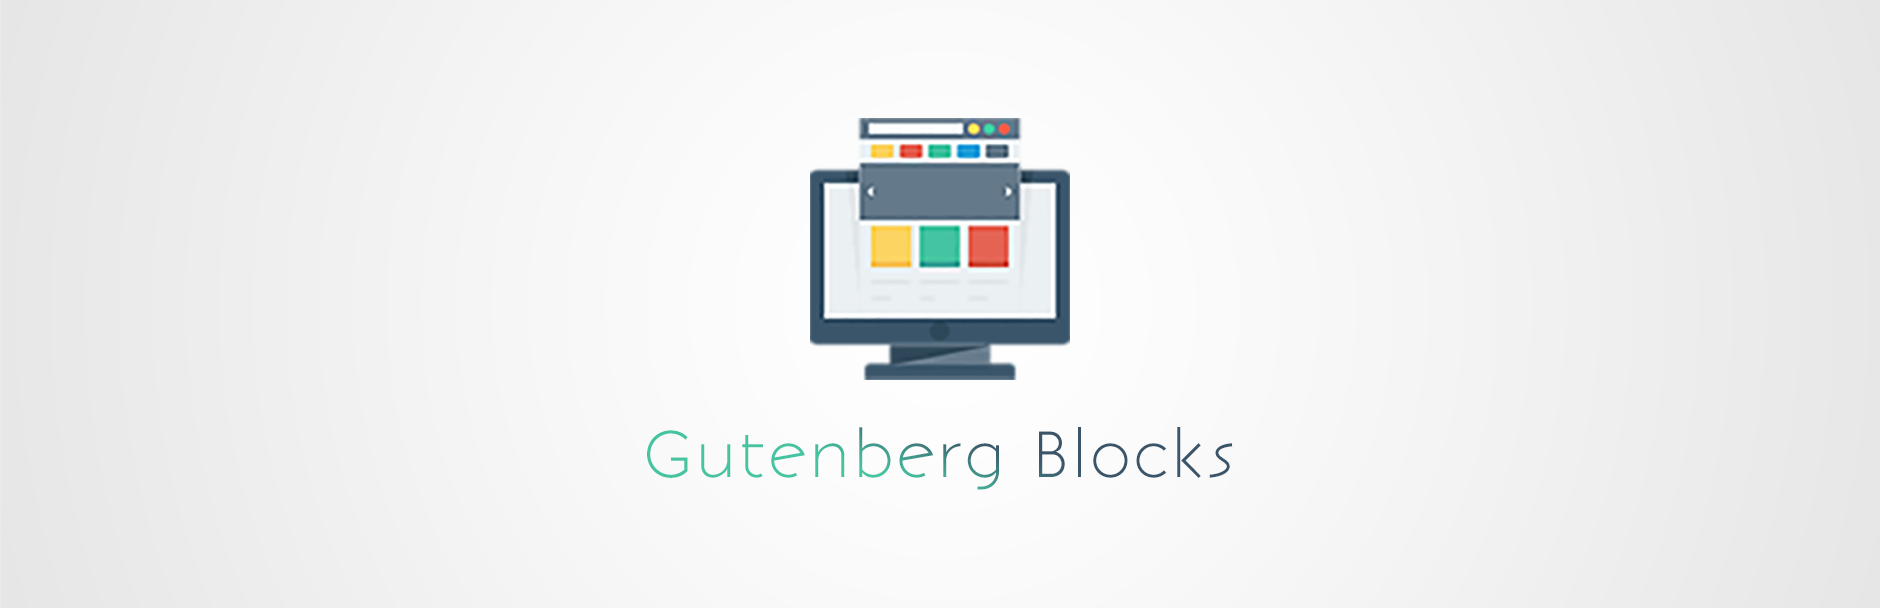 Gutenberg Blocks By WordPress Download Manager Preview - Rating, Reviews, Demo & Download